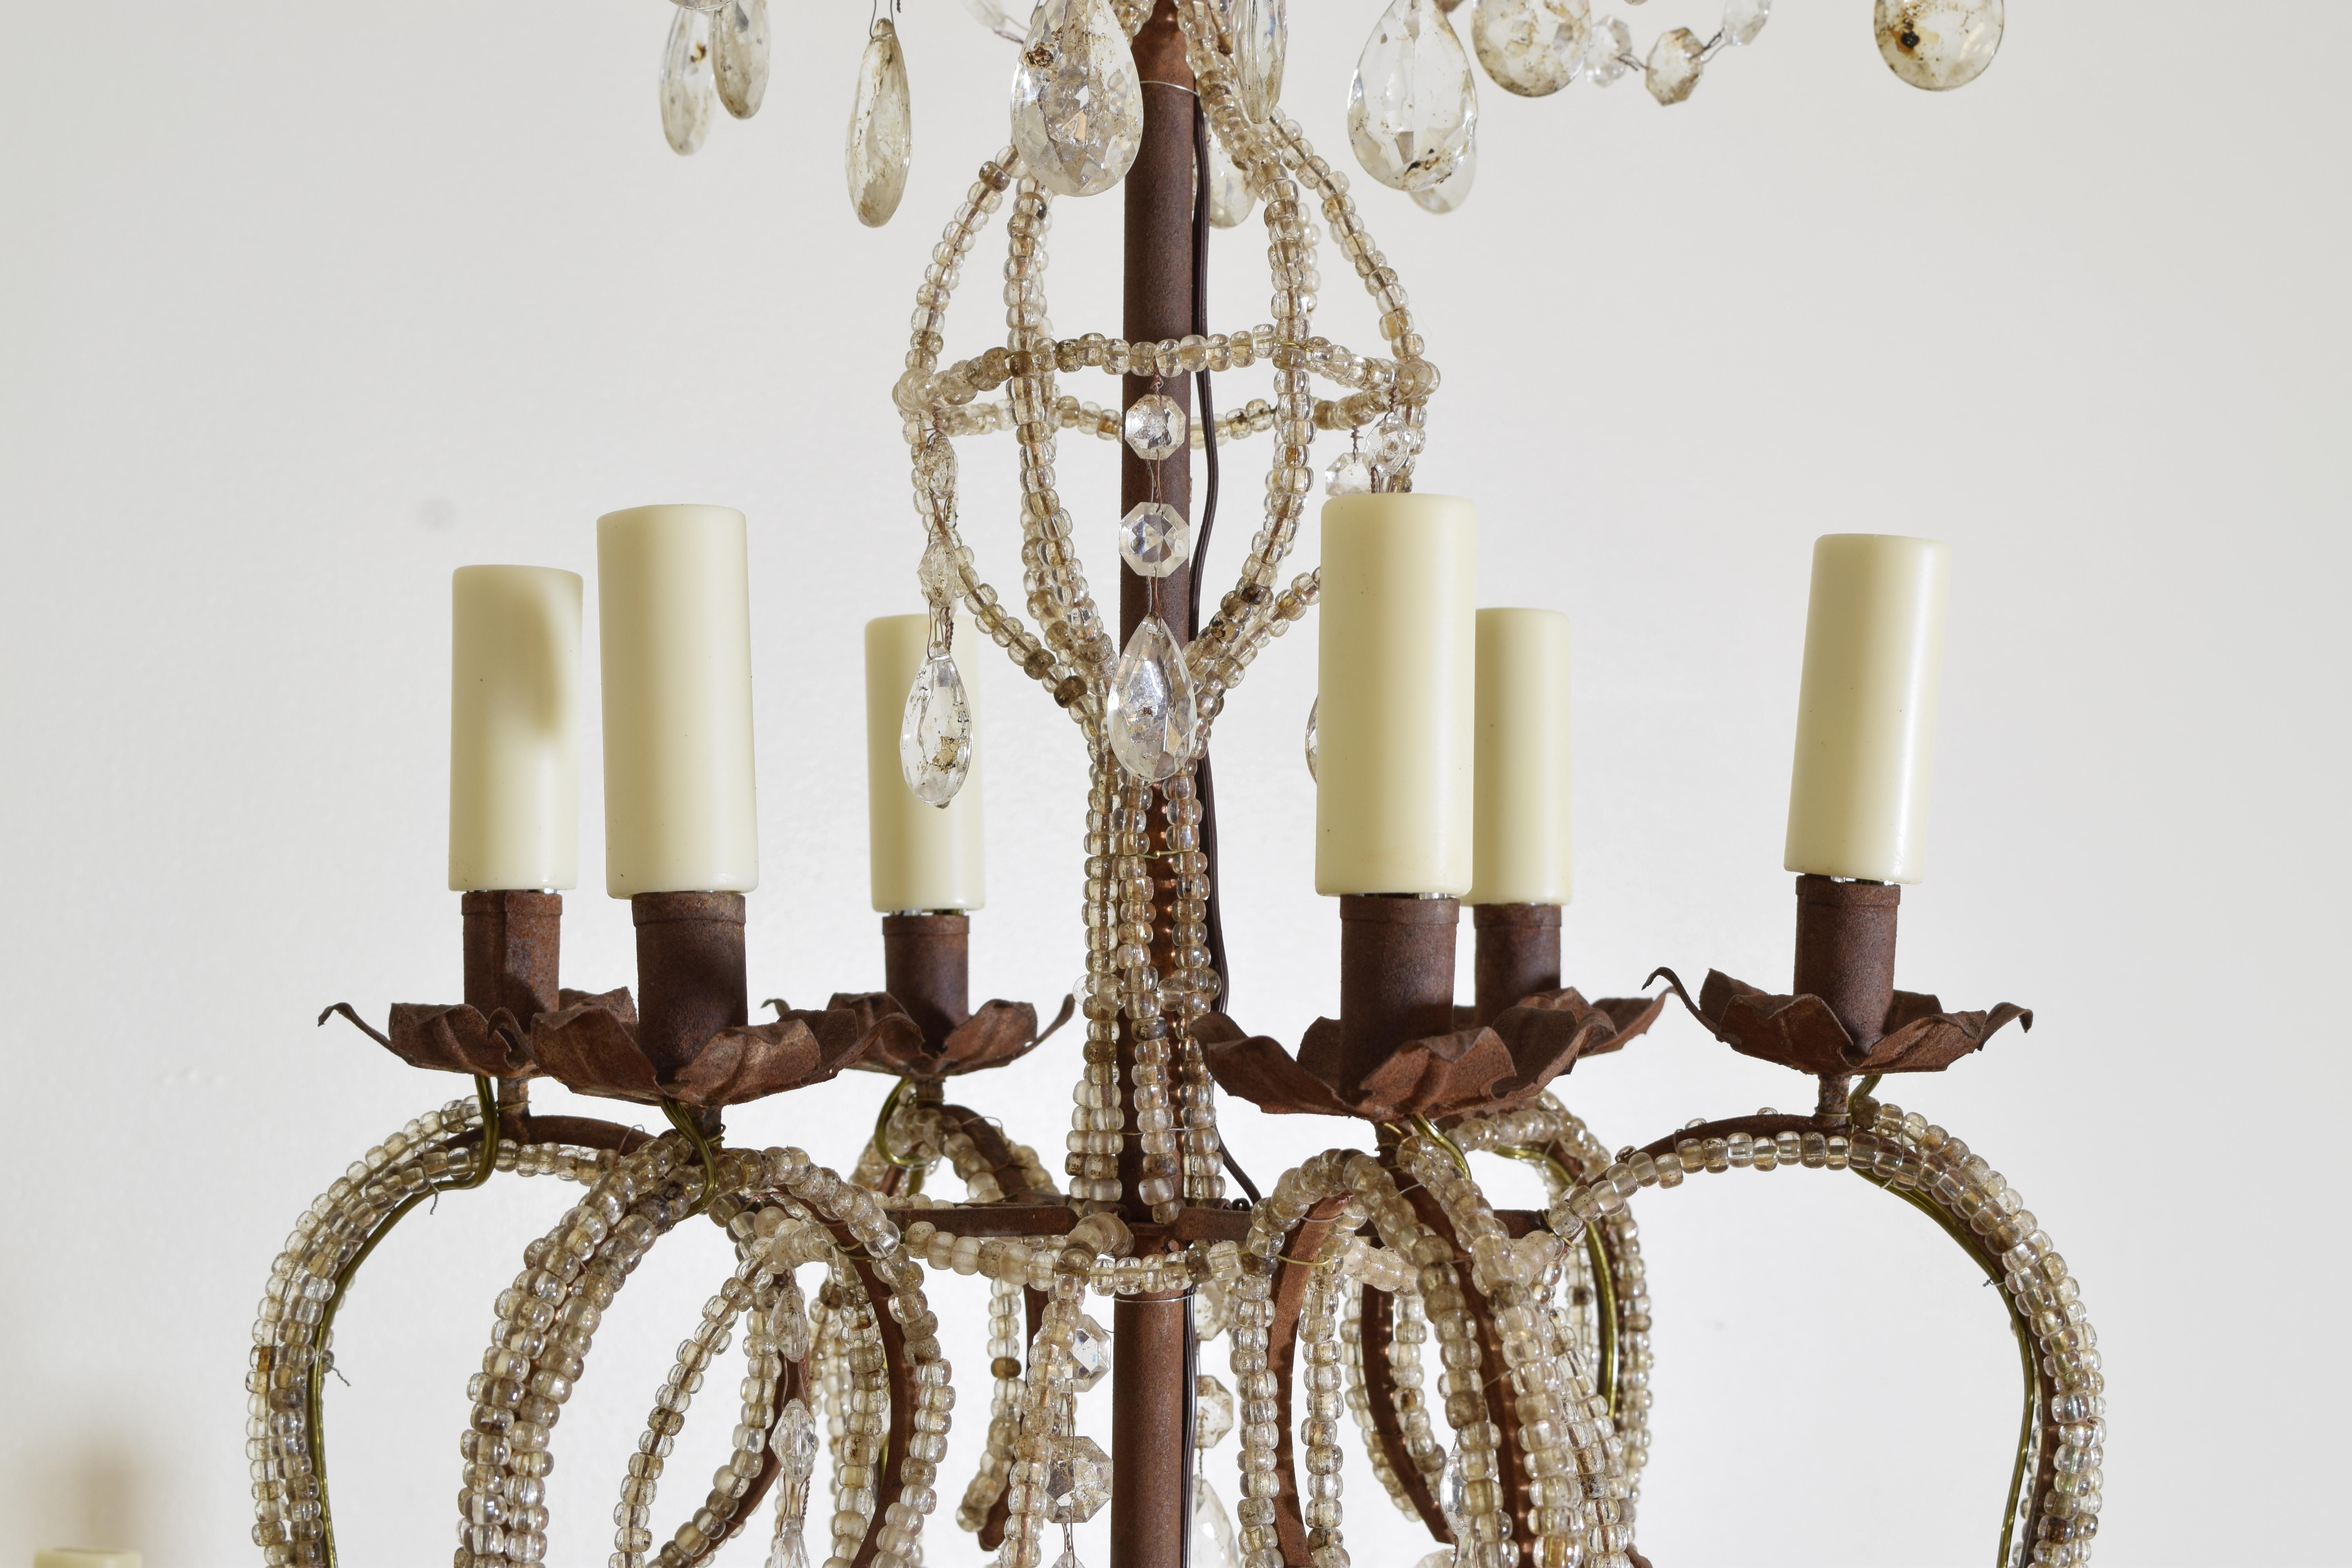 Pair of Italian, Genovese, 2-Tier, 12-Light Glass and Iron Chandeliers In Good Condition For Sale In Atlanta, GA